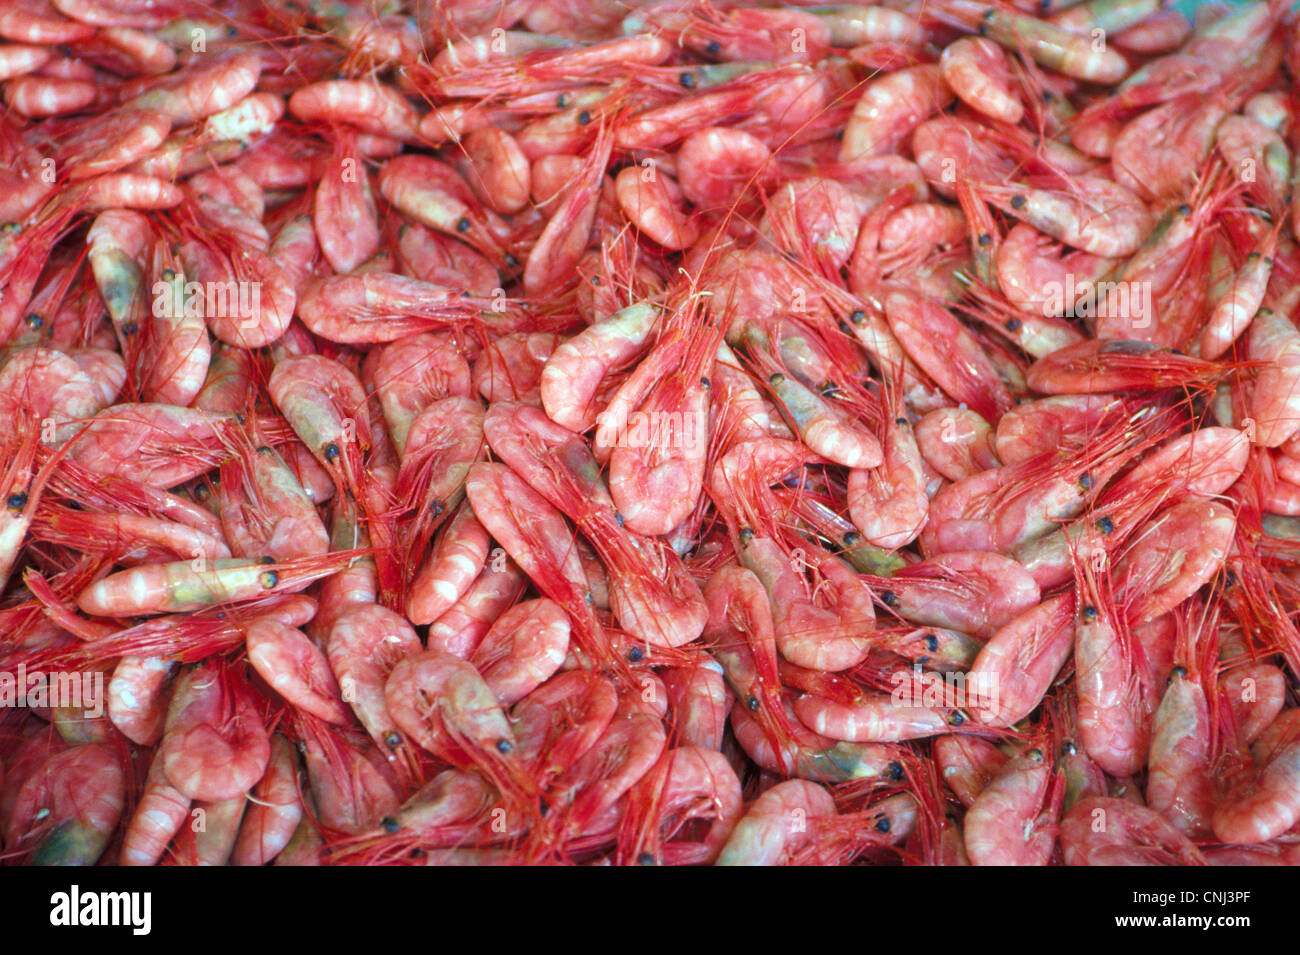 Piles of fresh pink Cold-water Shrimp from the North Sea are offered for sale at an outdoor seafood market in Stavanger, Norway, Scandinavia. Stock Photo